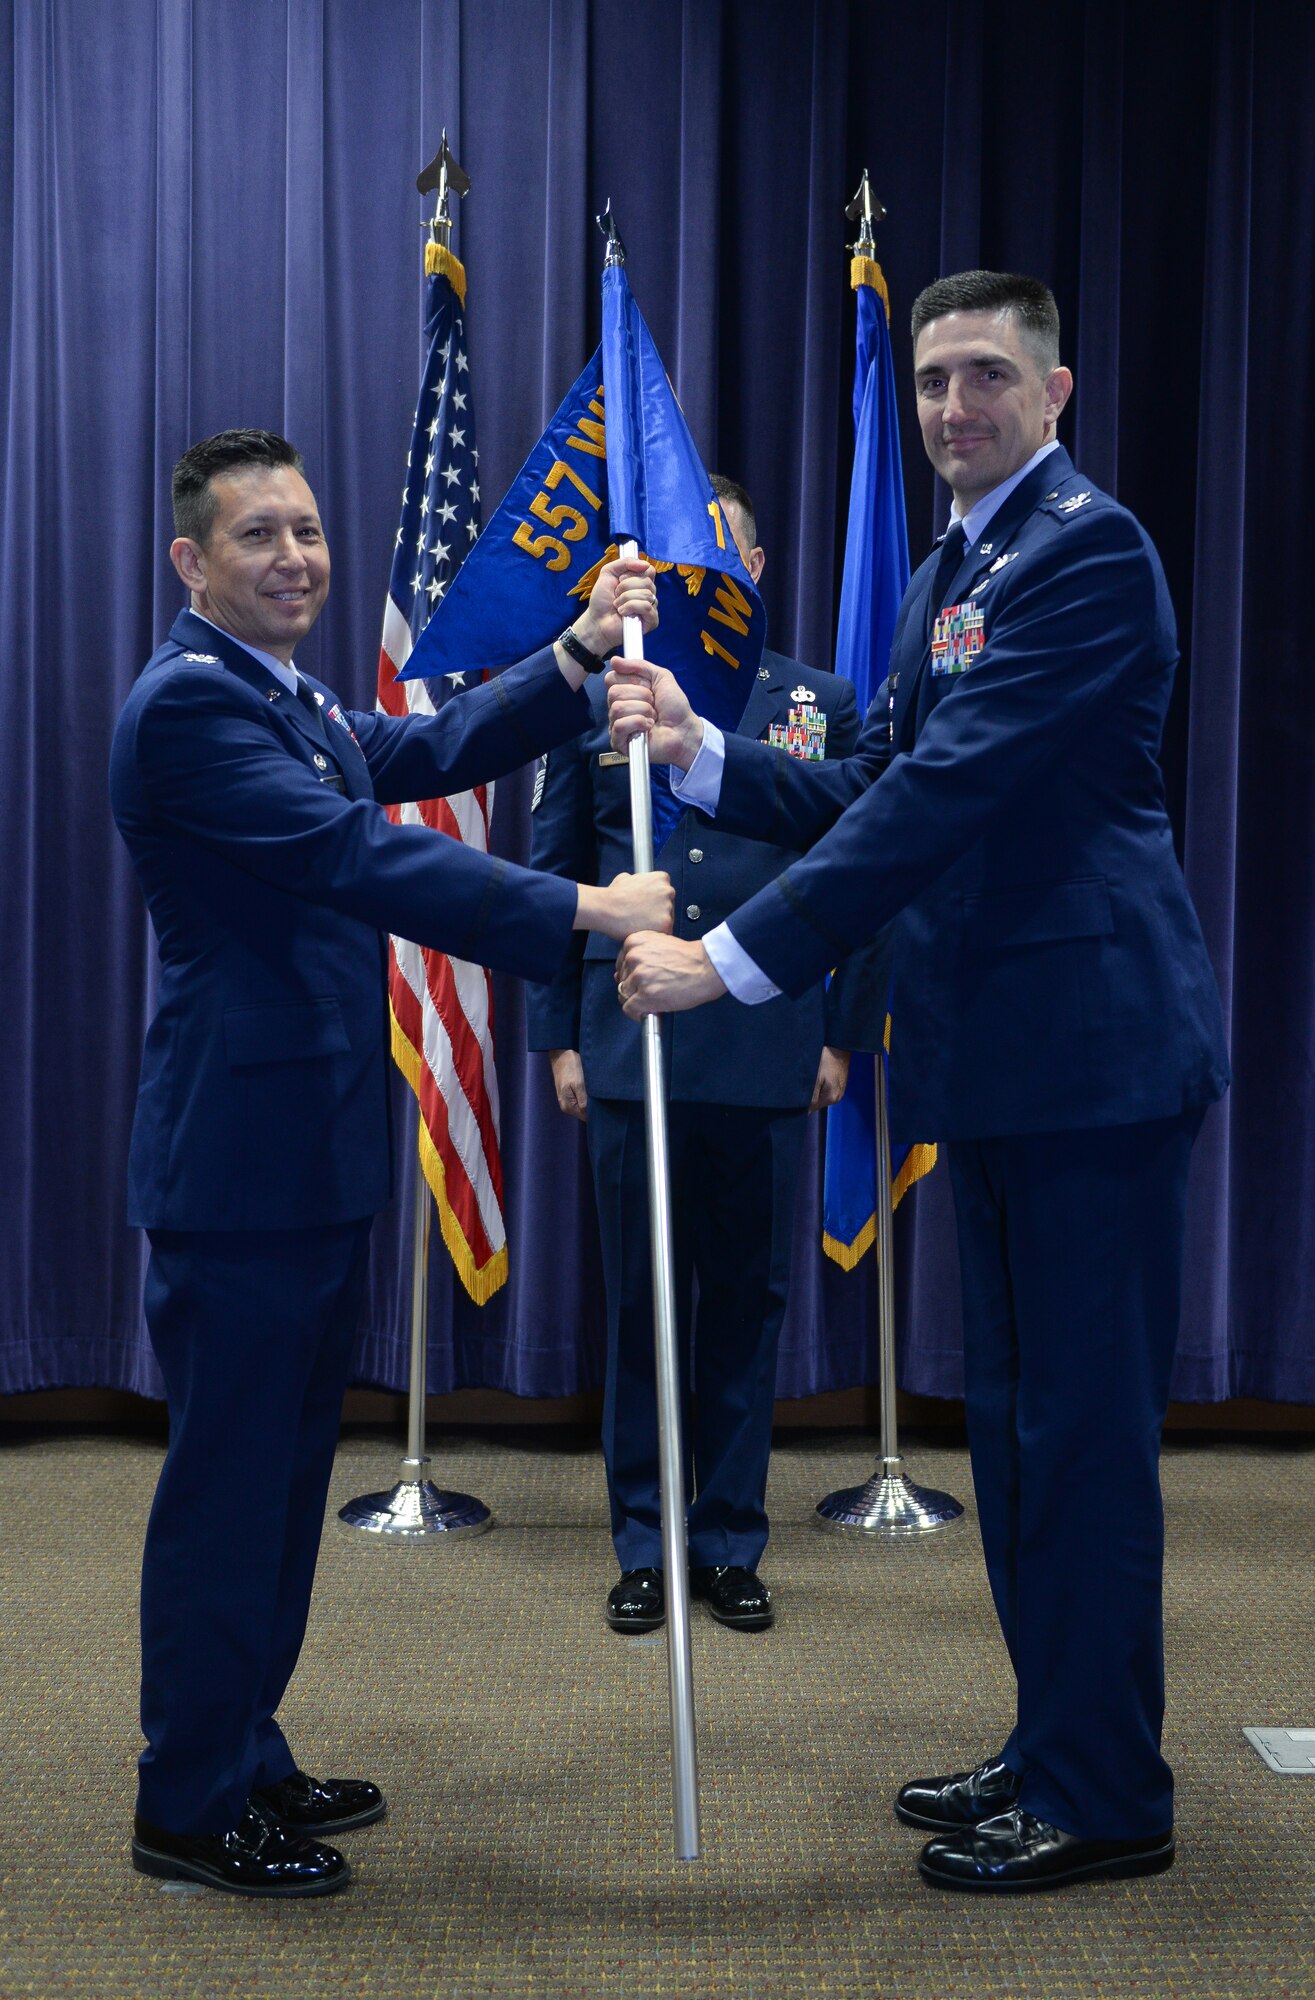 Col. William Carle, 557th Weather Wing commander, passes the guidon to Col. Thomas Blazek as he assumes command of the 1st Weather Group in the 557th Weather Wing auditorium June 21 at Offutt Air Force Base, Neb. (U.S. Air Force by Zachary Hada)